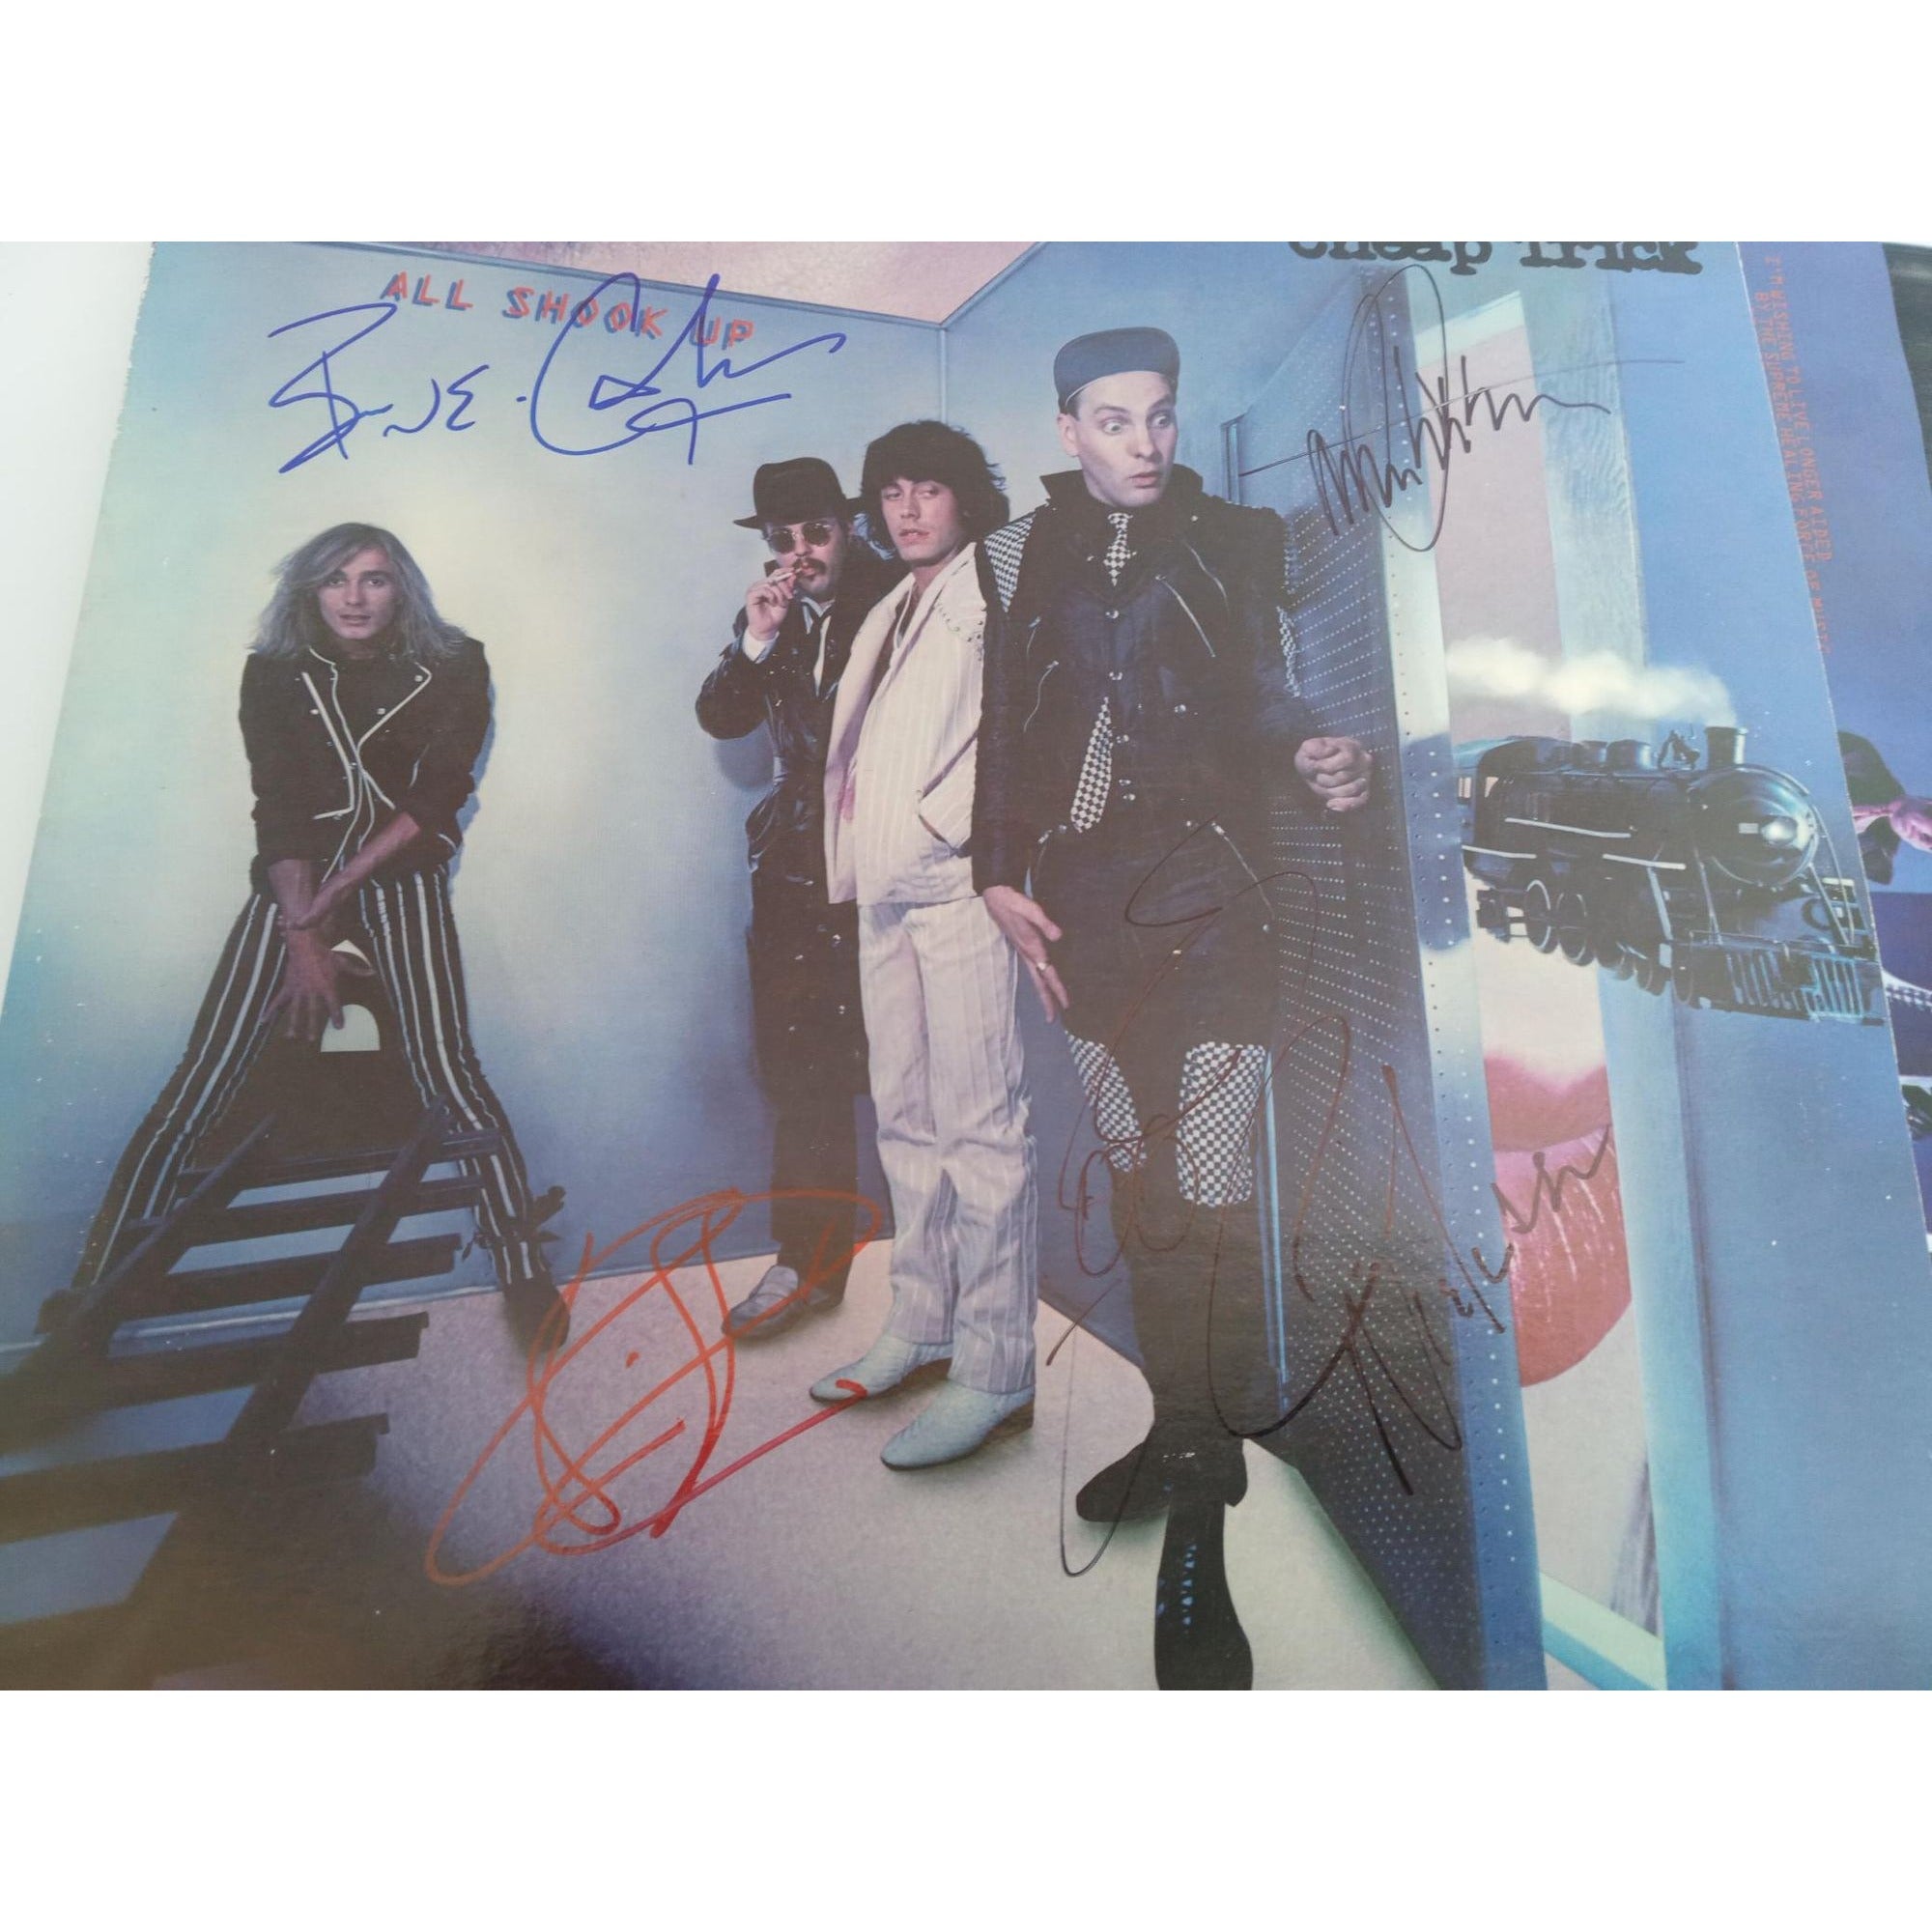 Cheap Trick Rob Zander band signed All Shook Up LP